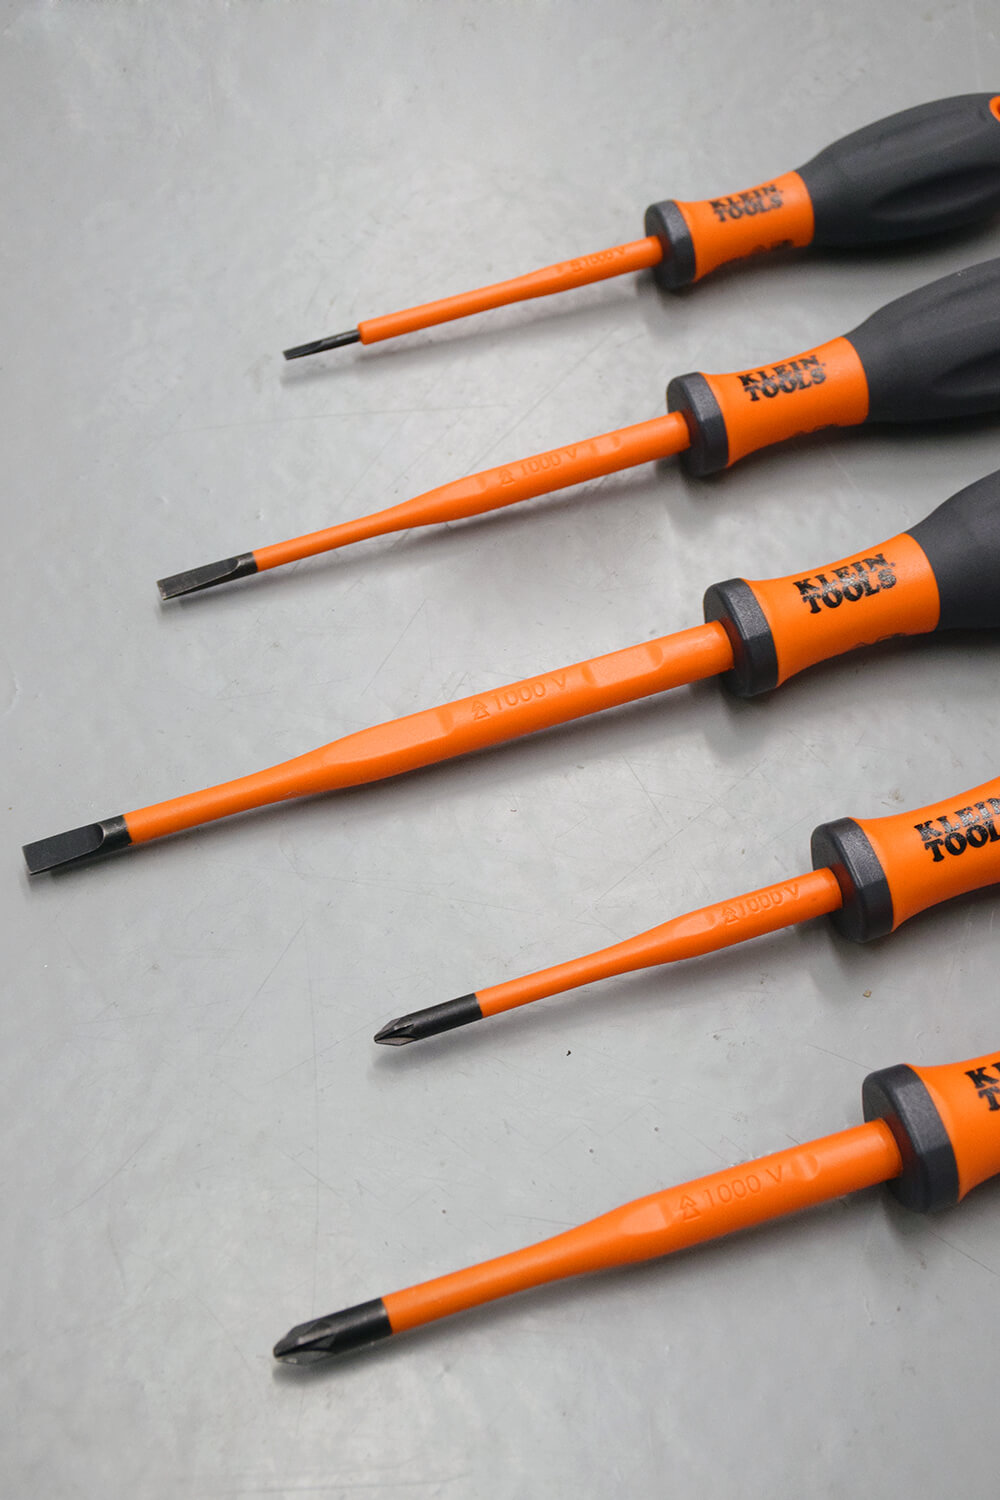 klein-tools-screwdriver-set-product-review-2